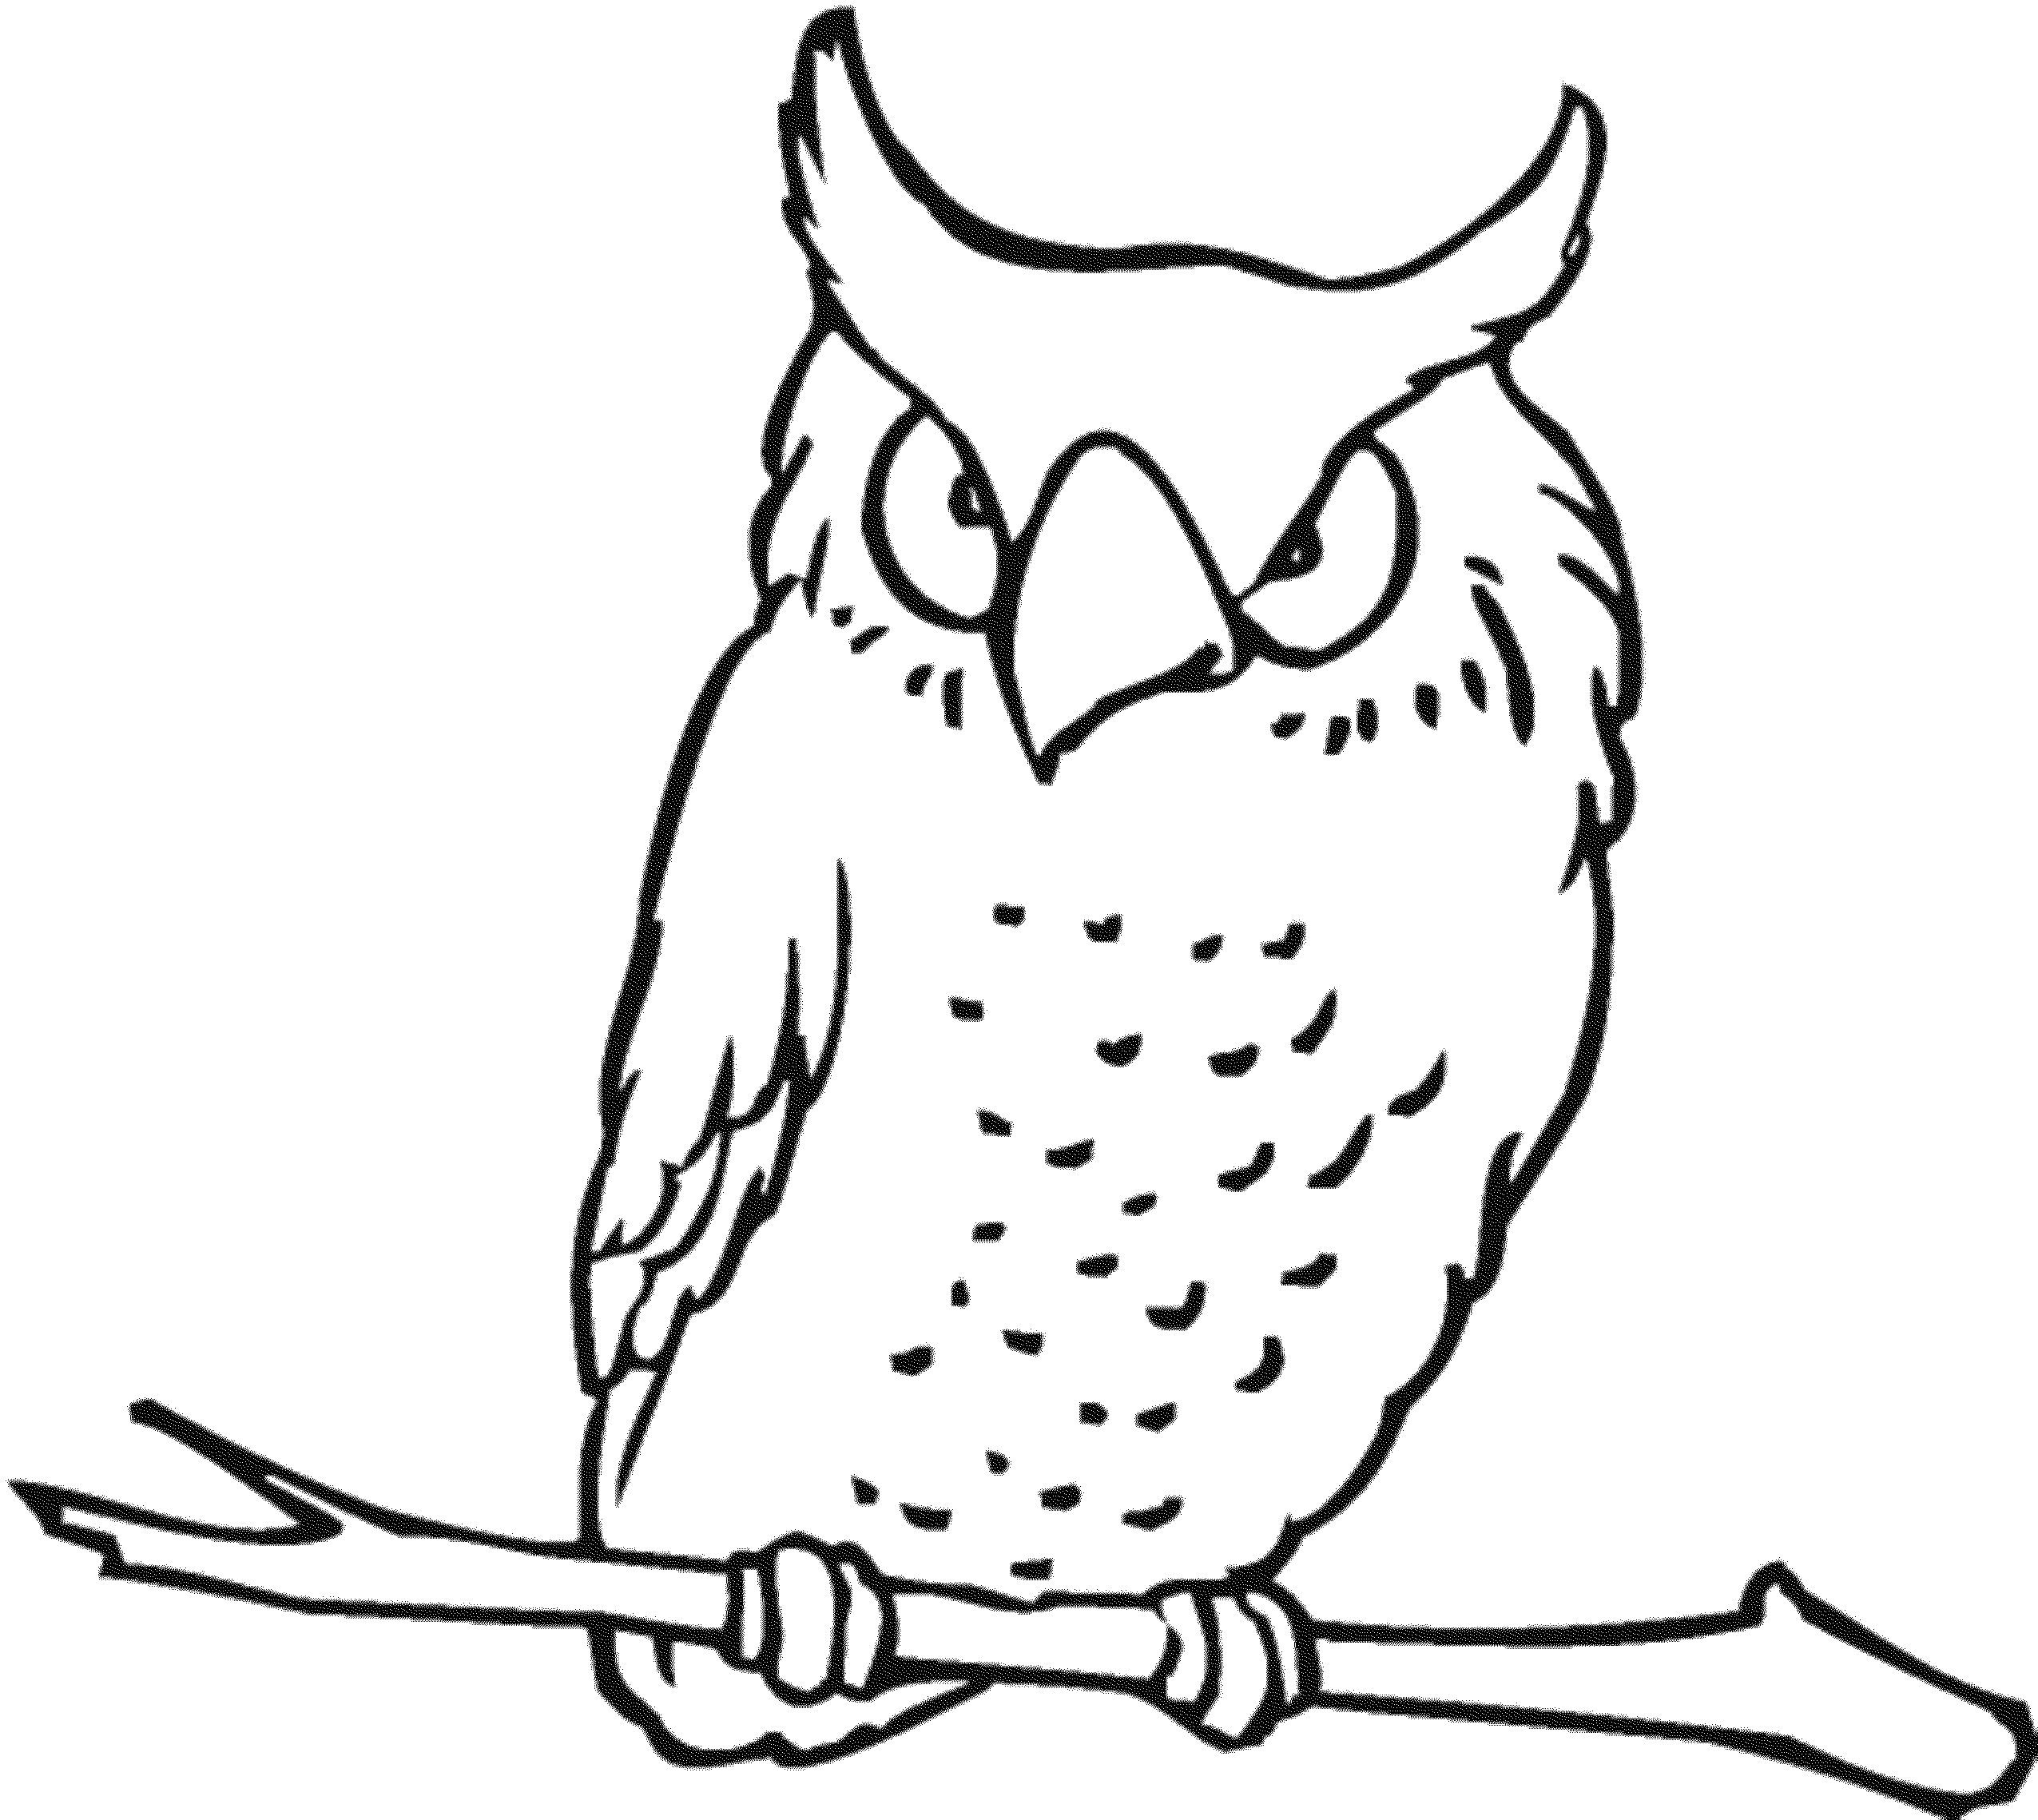 Print & Download Owl Coloring Pages for Your Kids